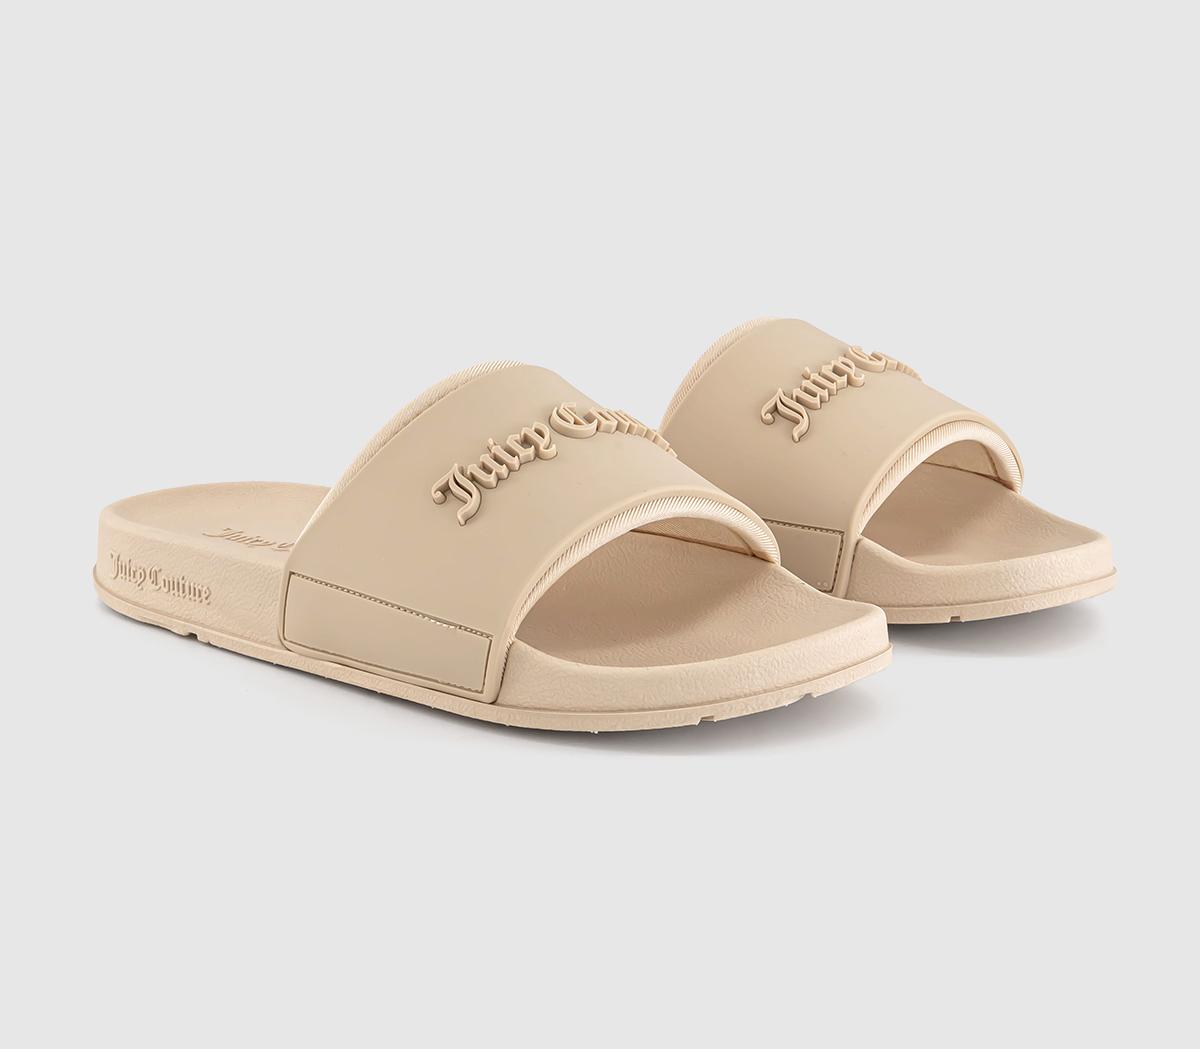 Juicy Couture Womens Breanna Debossed Sliders Brazilian Sand Natural, 6